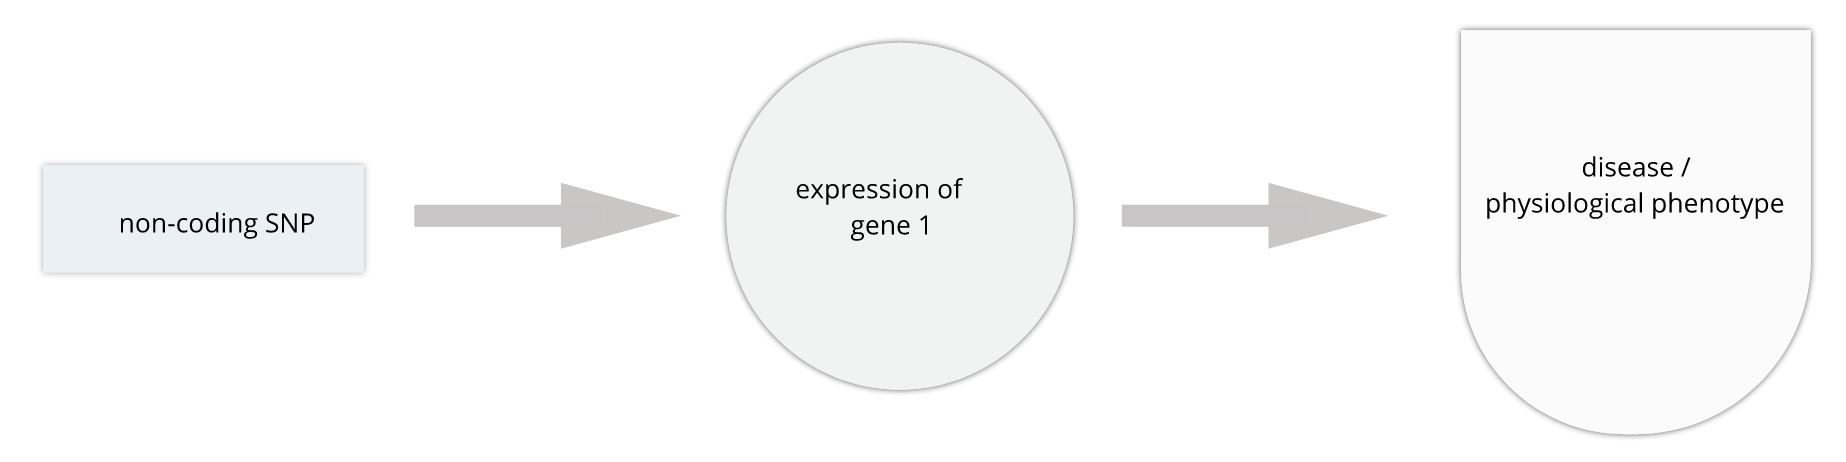 Here a non-coding SNP influences expression of a gene, which in turn affects a disease phenotype or other outcome of interest.